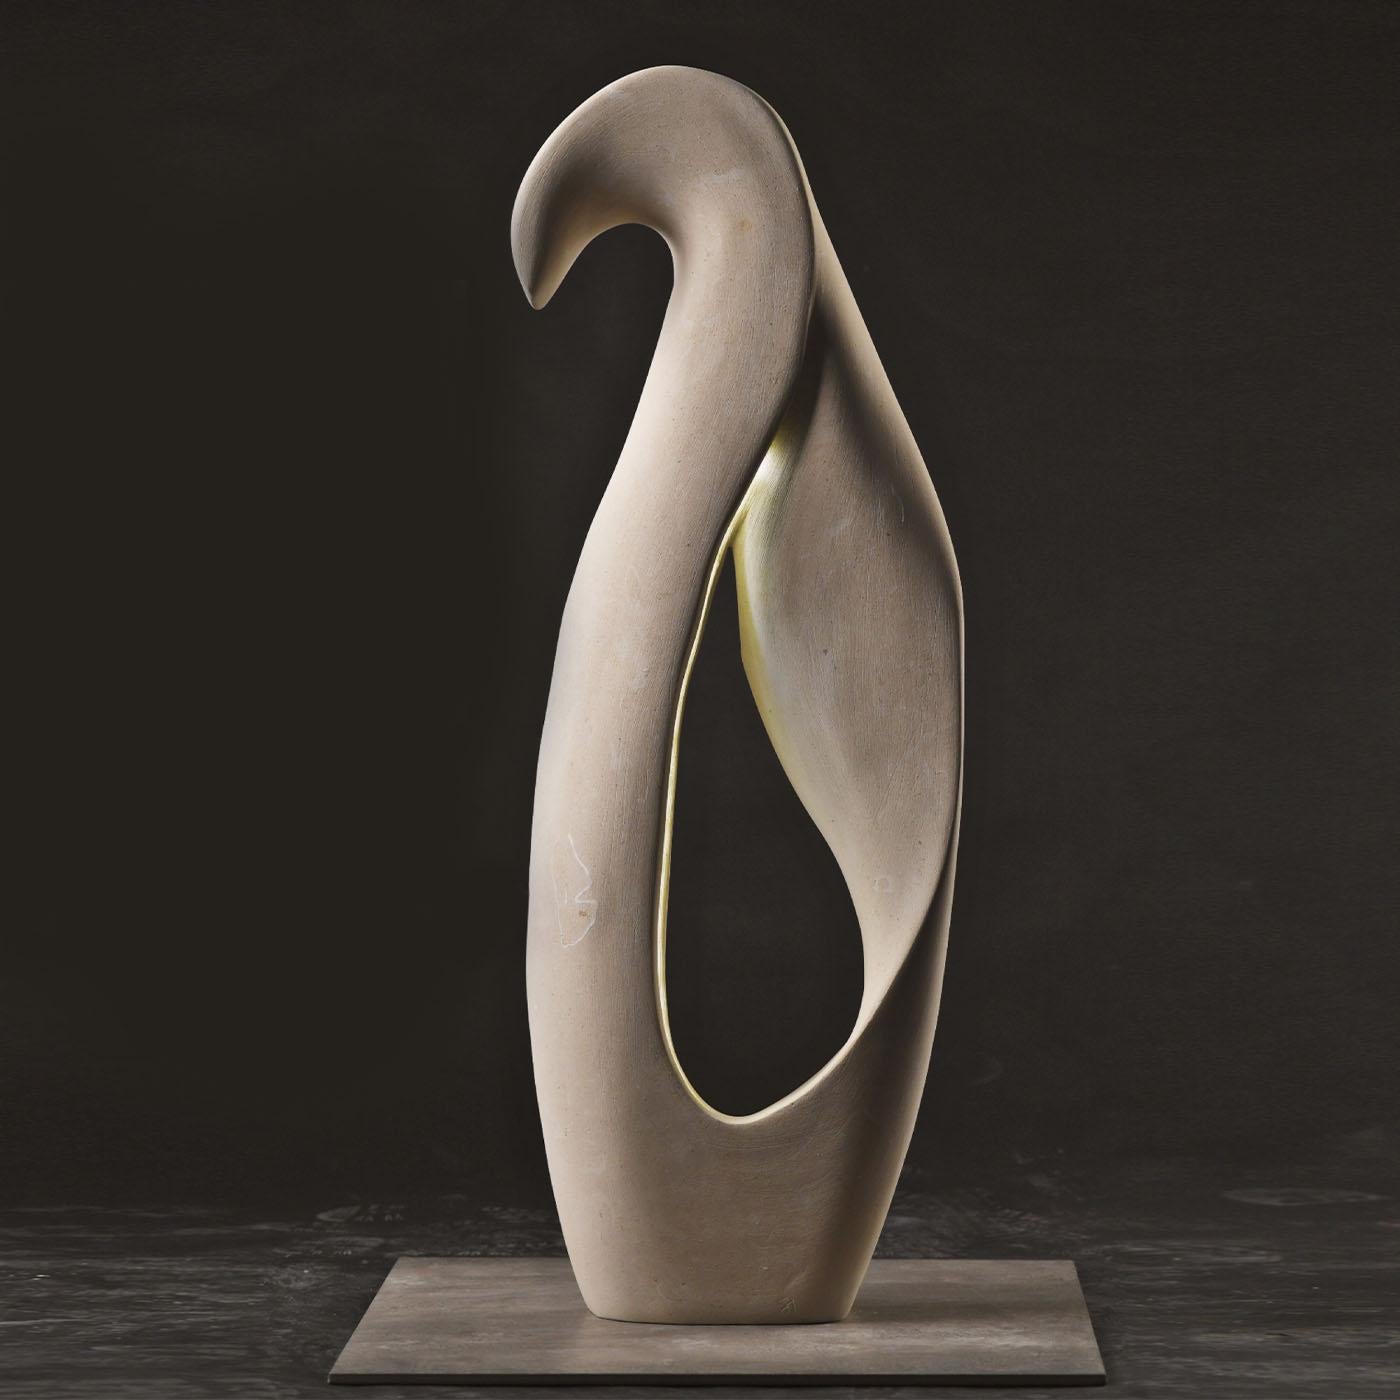 Wind softly blowing and seemingly shaping nature's shapes with its caress inspired this singular luminous sculpture signed by artist Andrea Serra. Handcrafted of a marine-origin white stone rich in vegetable and animal fossils that can only be